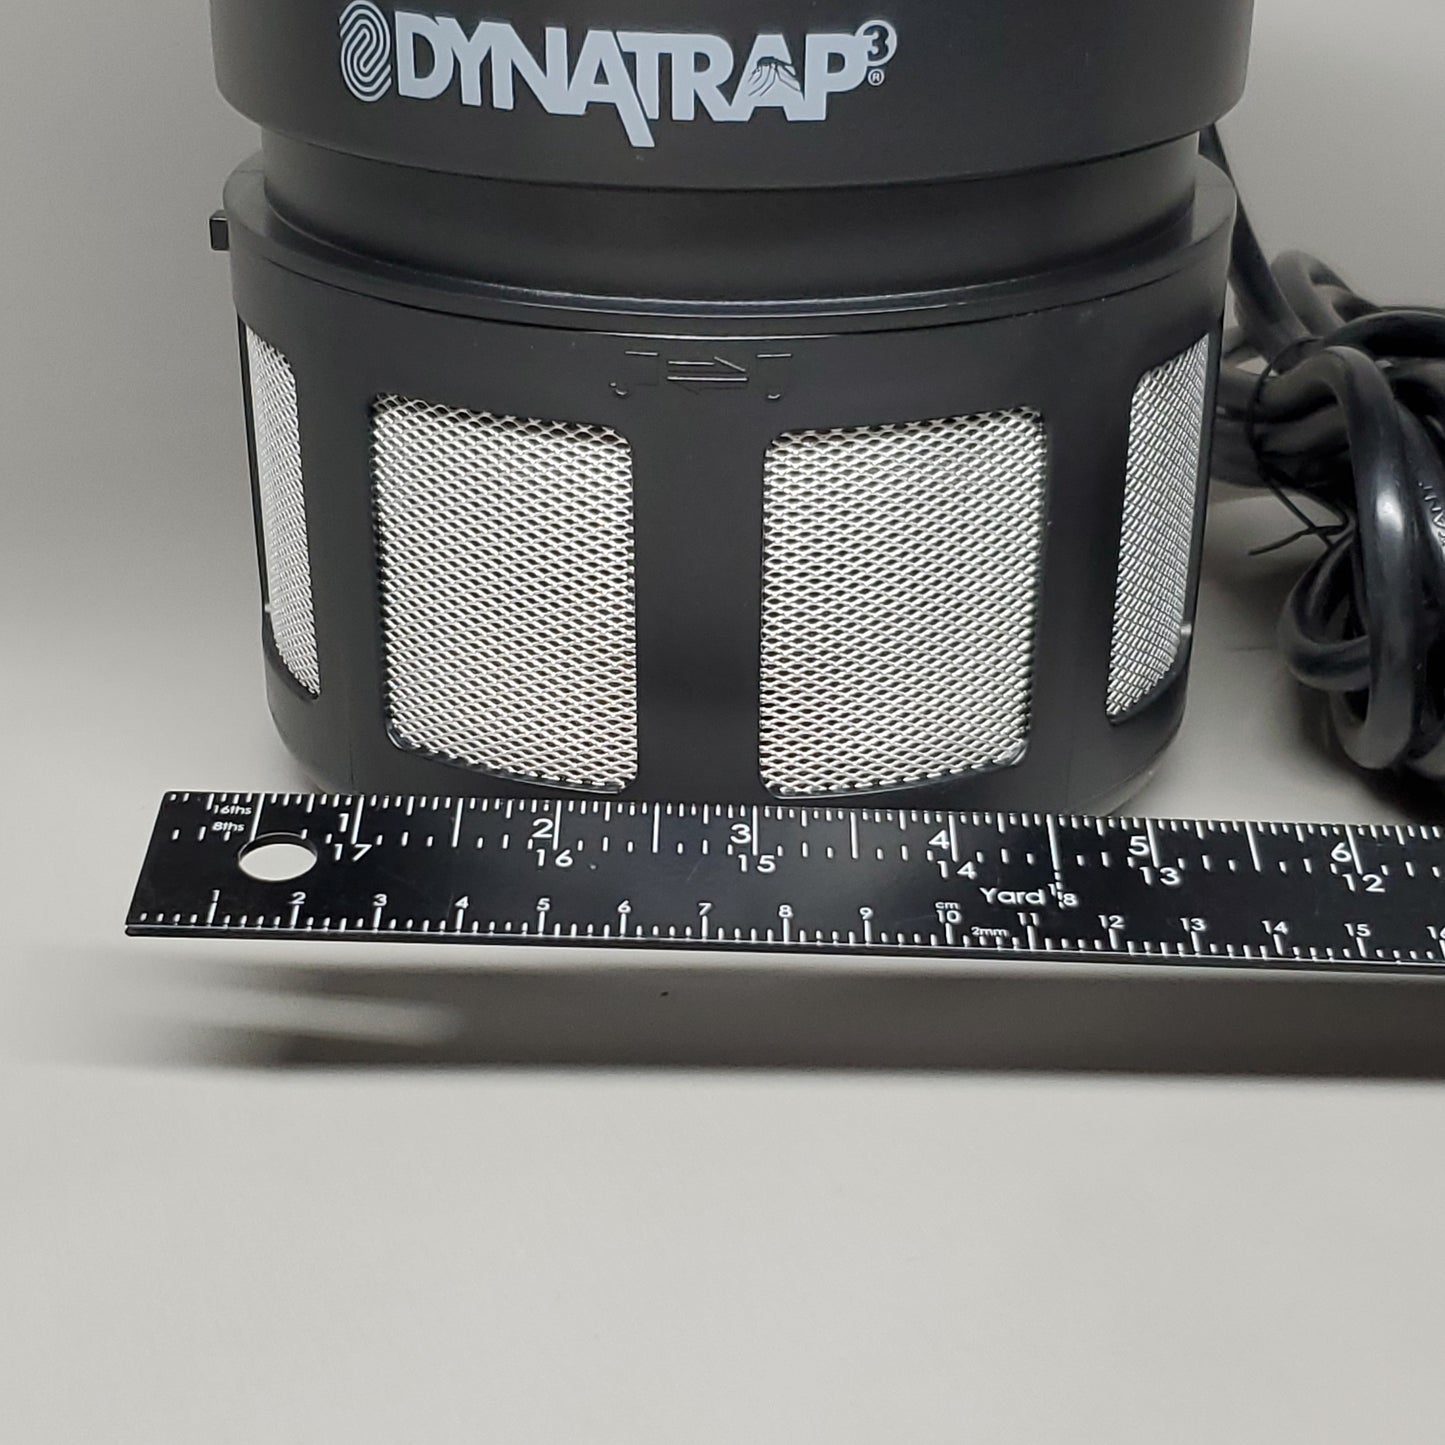 DYNATRAP Mosquito & Flying Insect Trap Hang Or Wall Mount 1/2 Acre DT1100SR (New)